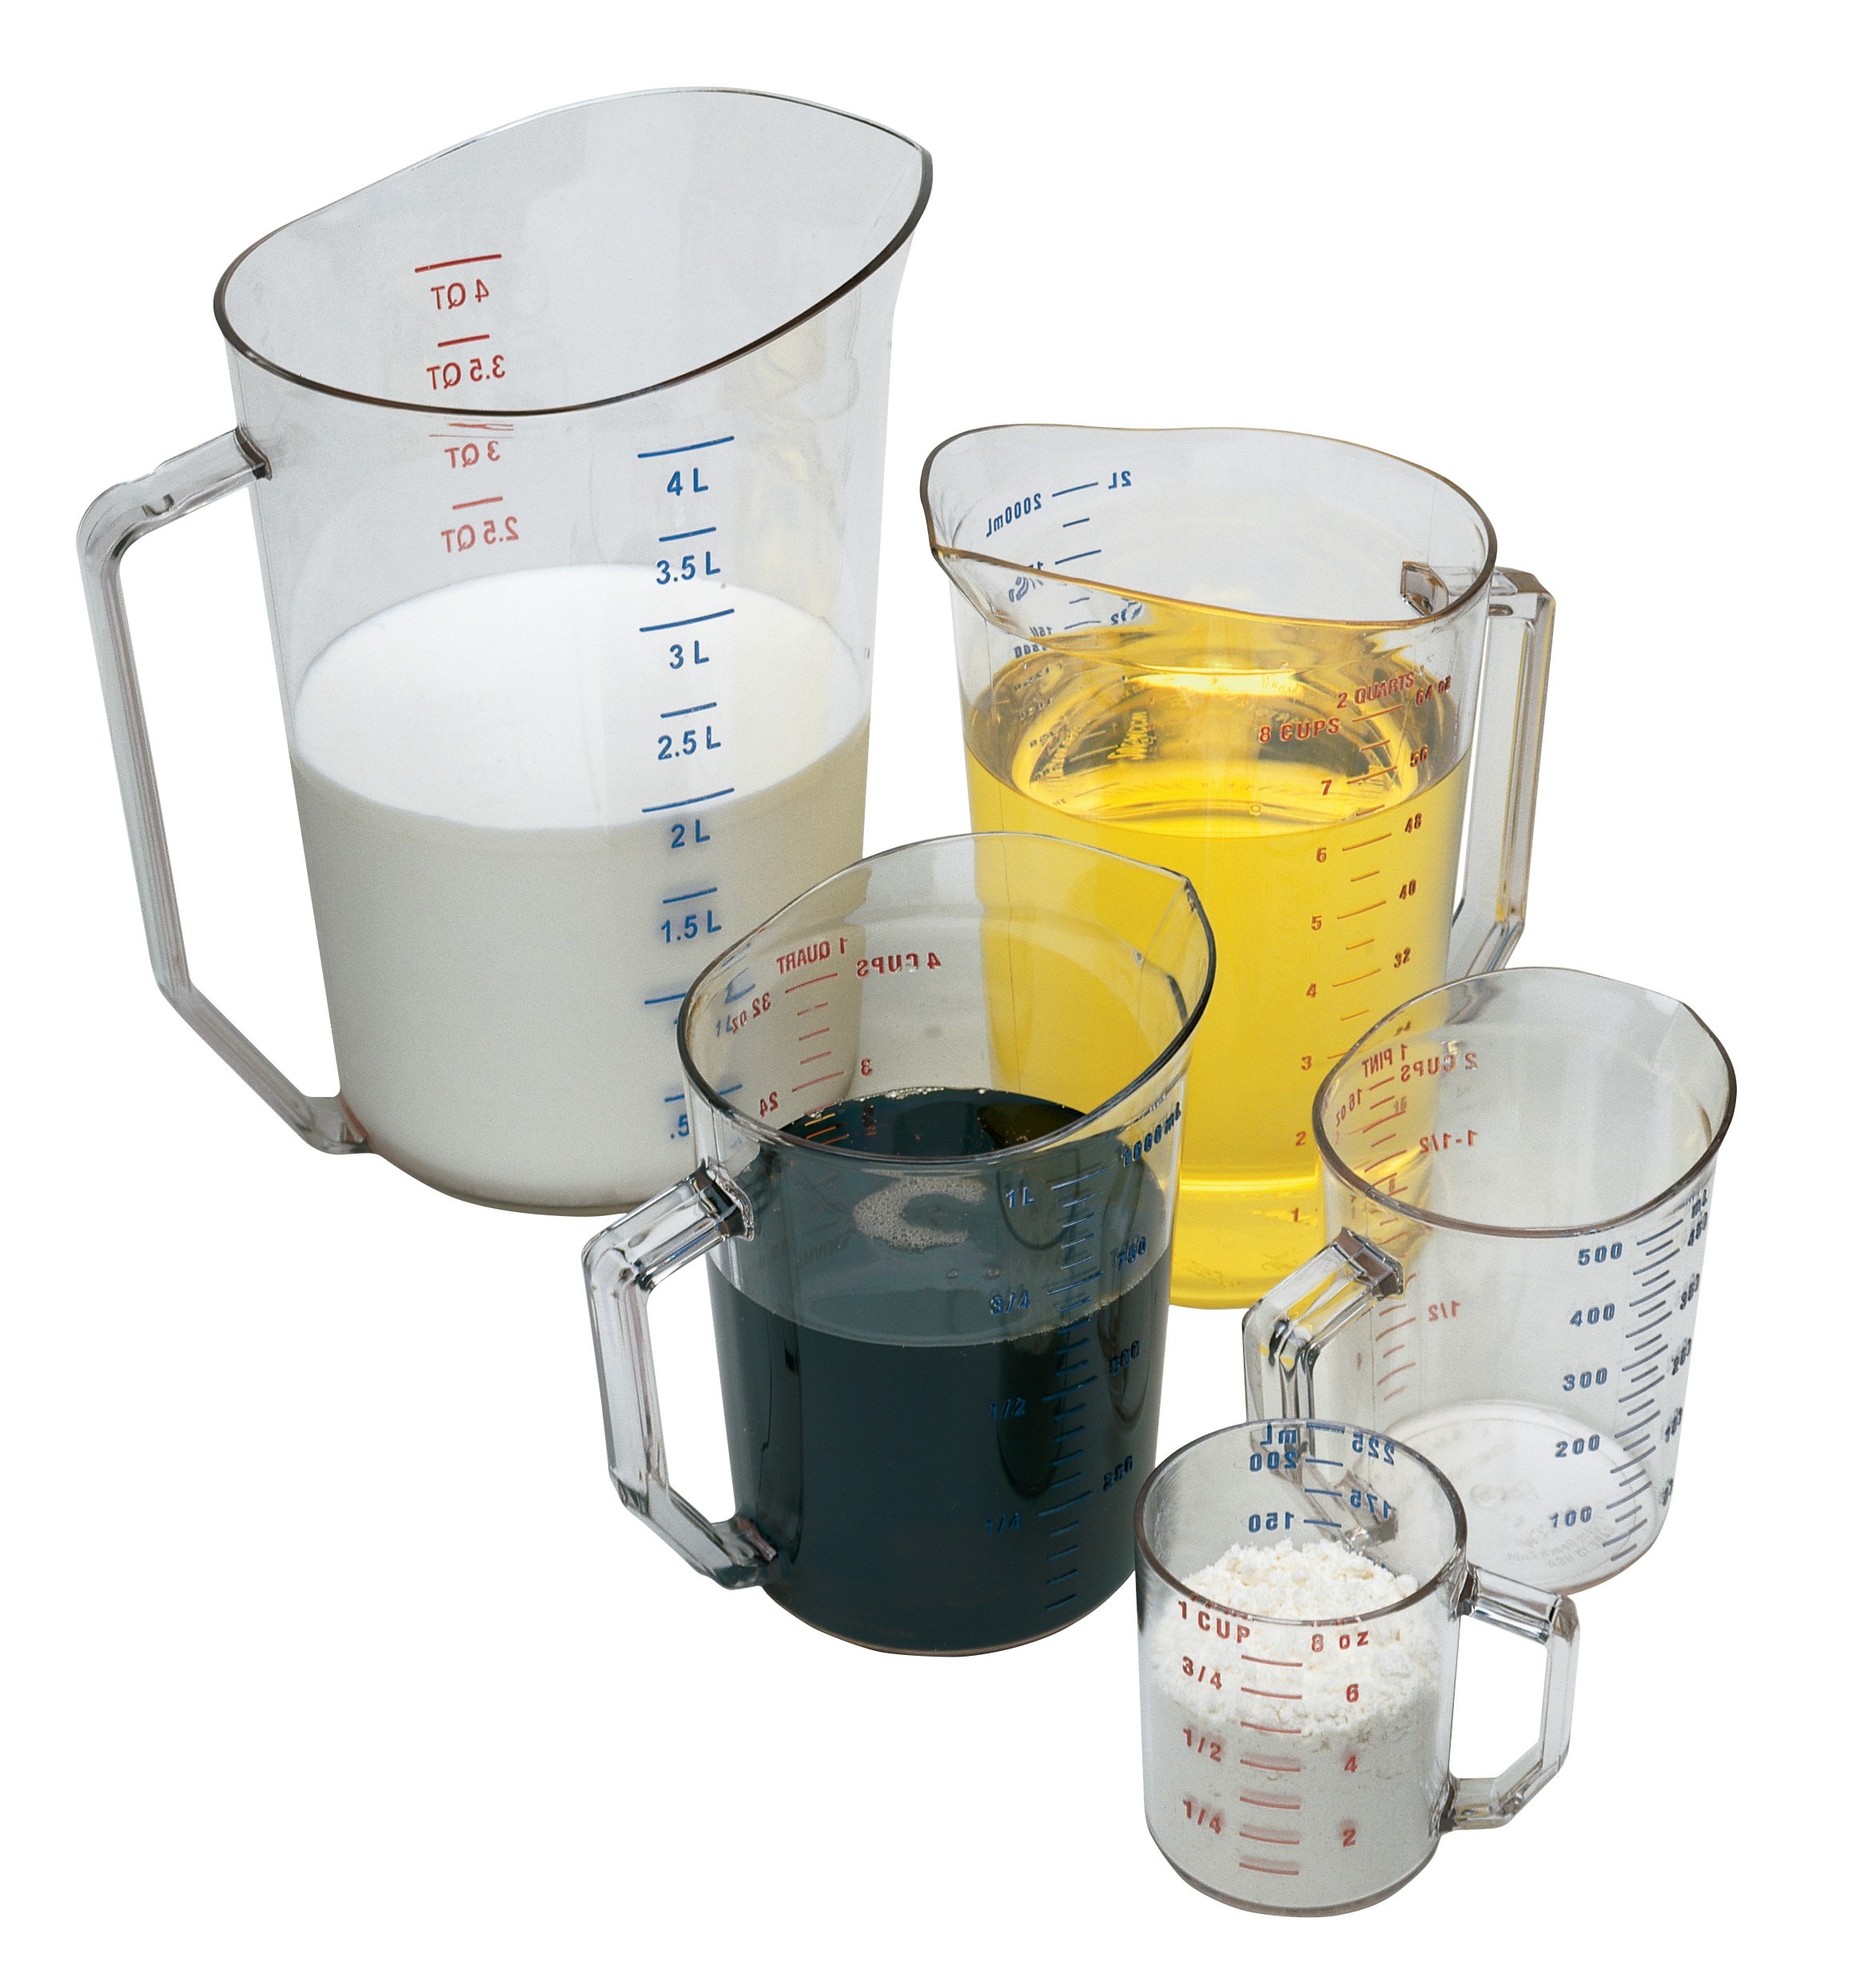 Commercial Glass Measuring Cup, 8 Cup Capacity (2 Liters